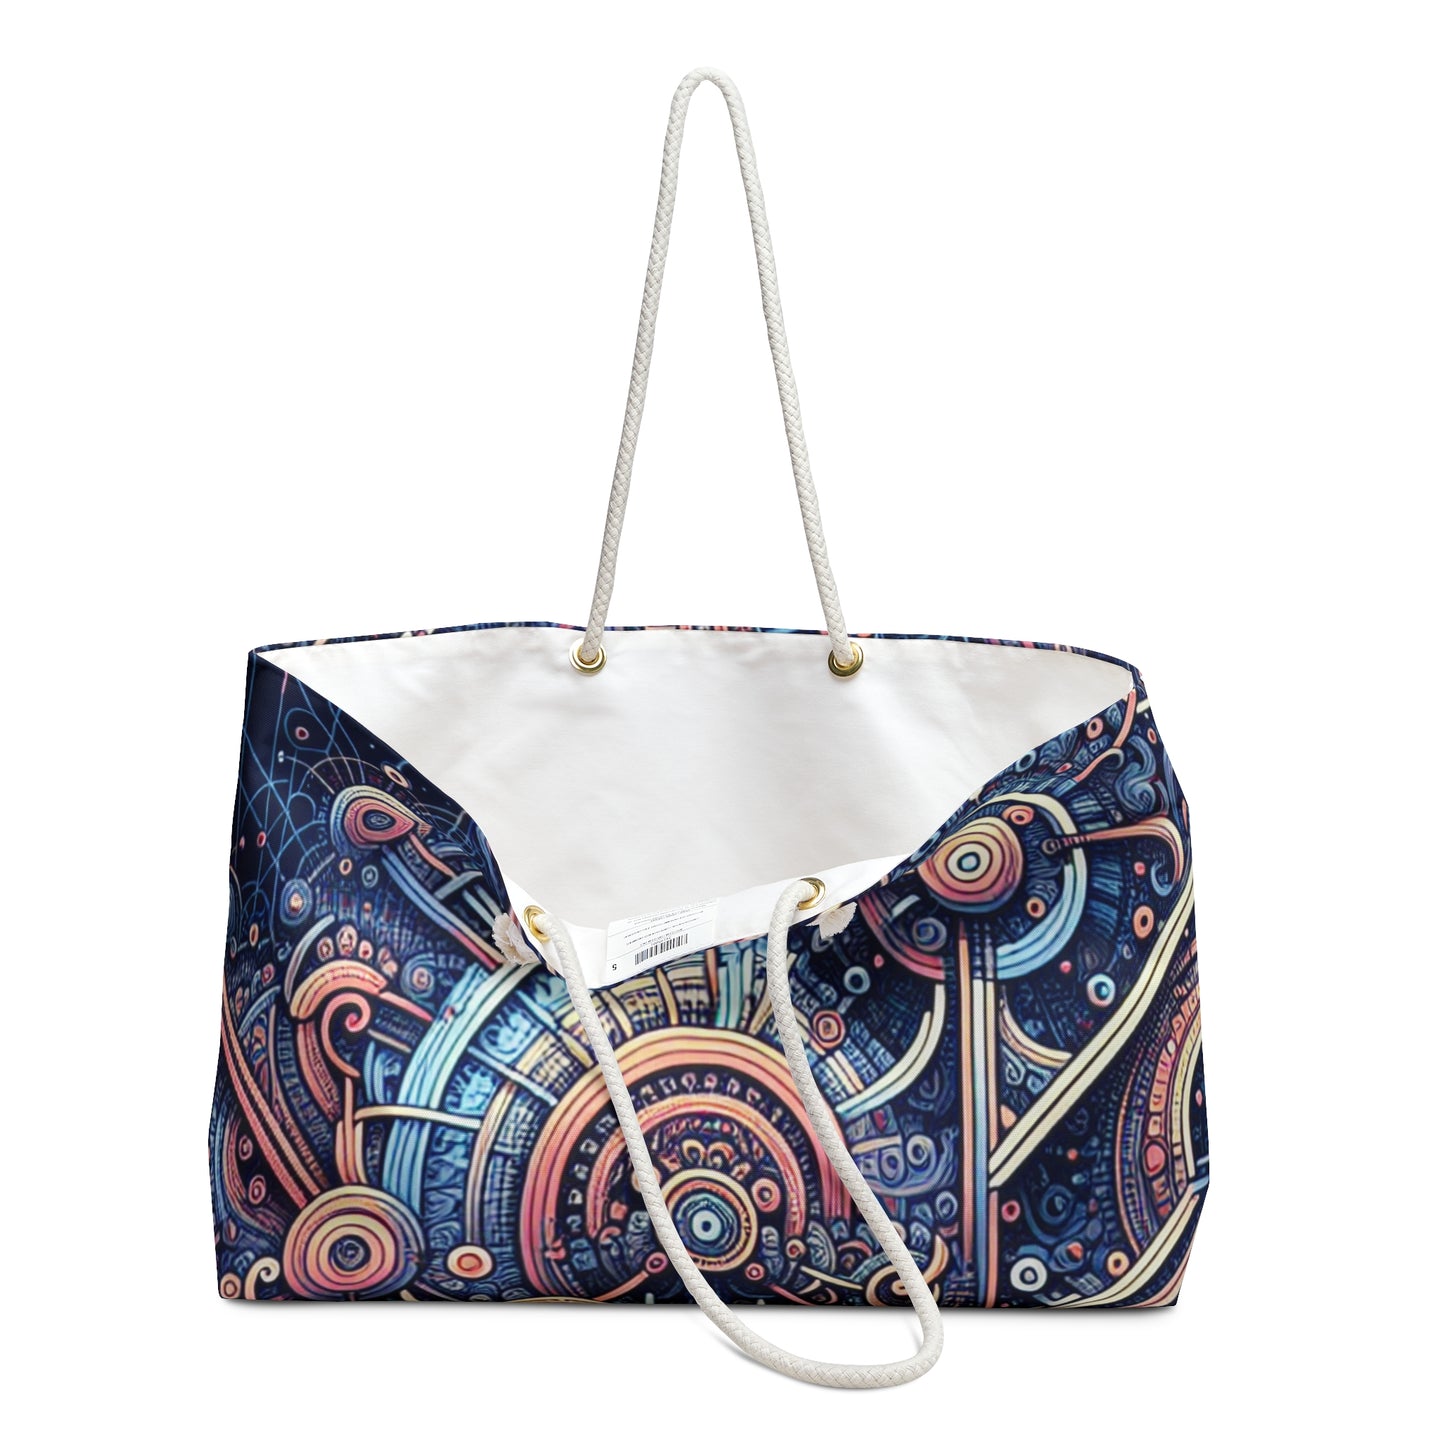 "Chaos & Order: A Dynamic Dance of Colors and Patterns" - The Alien Weekender Bag Algorithmic Art